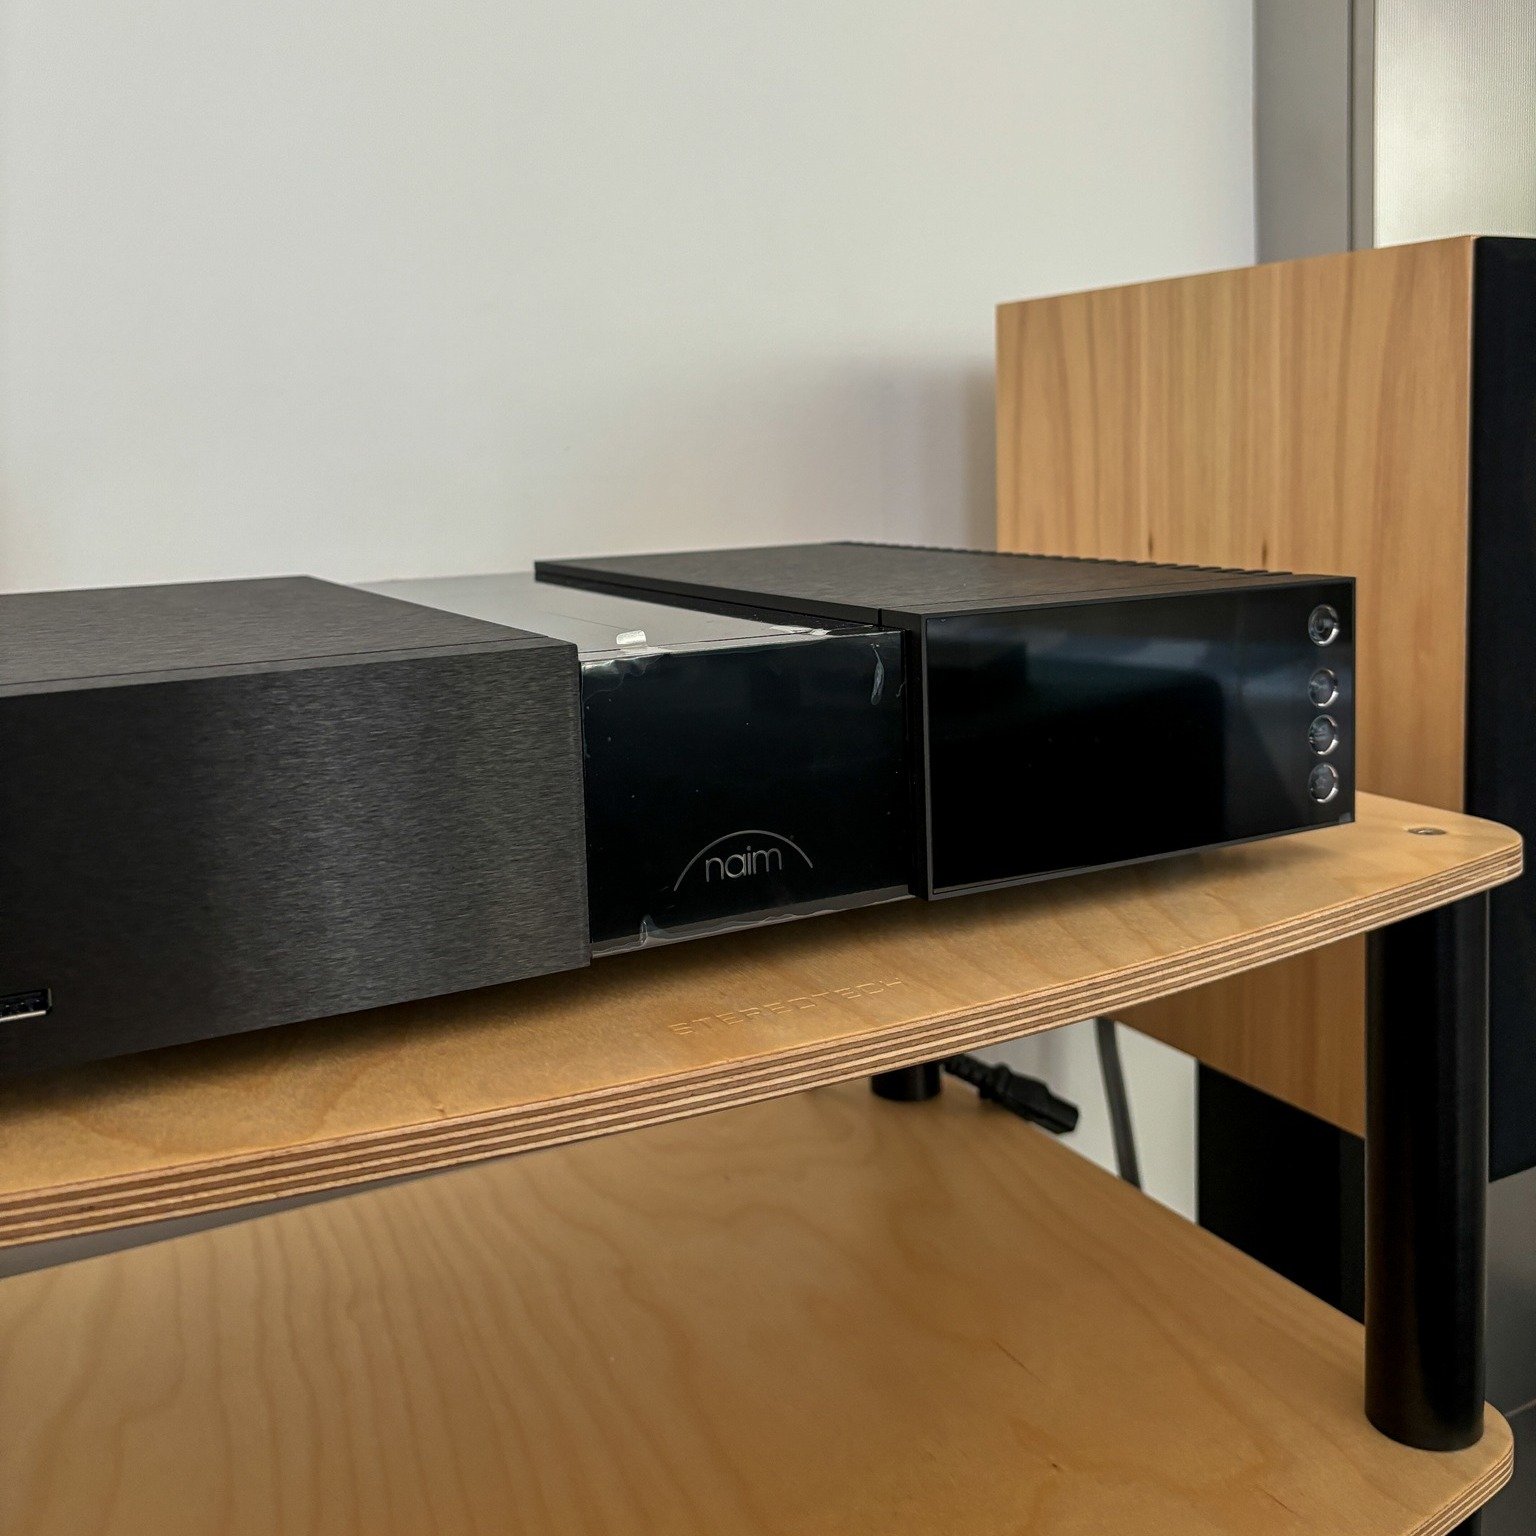 &quot;When it is critical for your retailer to step up? When you have an issue, such as I had with my recently purchased hi-fi equipment. What was great was to be treated as a person and not as a sale, unlike other hi-fi stores I have purchased from 